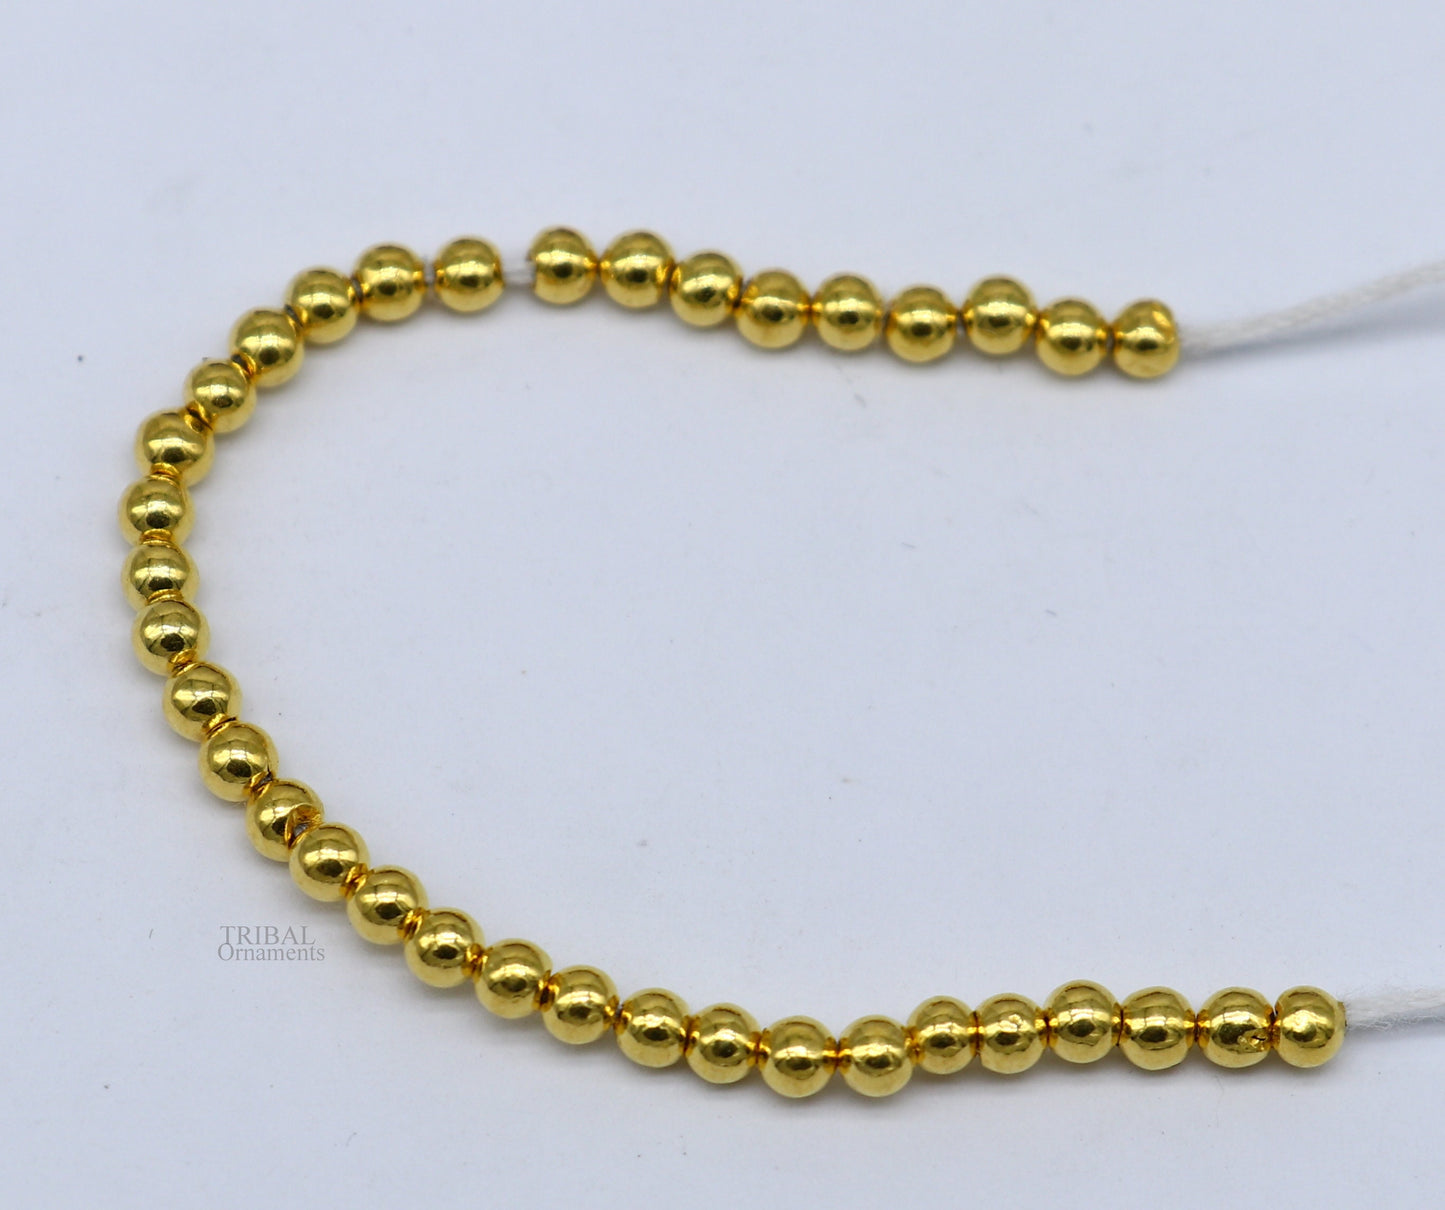 lot 20 pieces 3mm gold beads Vintage handmade loose beads traditional designer 22k yellow gold beads or ball for custom jewelry making bd18 - TRIBAL ORNAMENTS